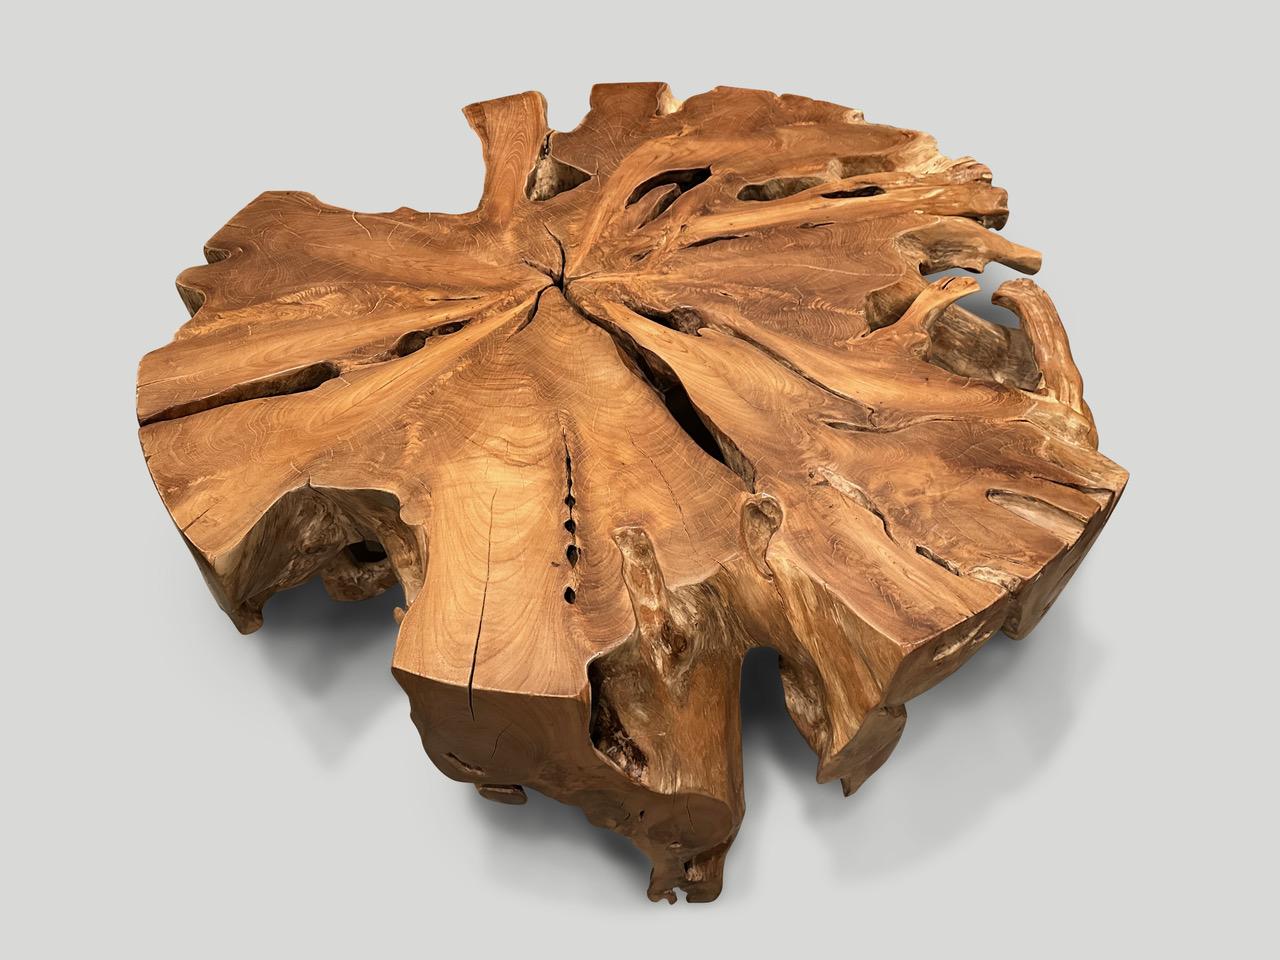 Reclaimed teak root coffee table. Hand carved into this beautiful usable shape whilst respecting the natural organic wood. We polished the aged teak with a natural oil finish revealing the beautiful wood grain. It’s all in the details.

Own an